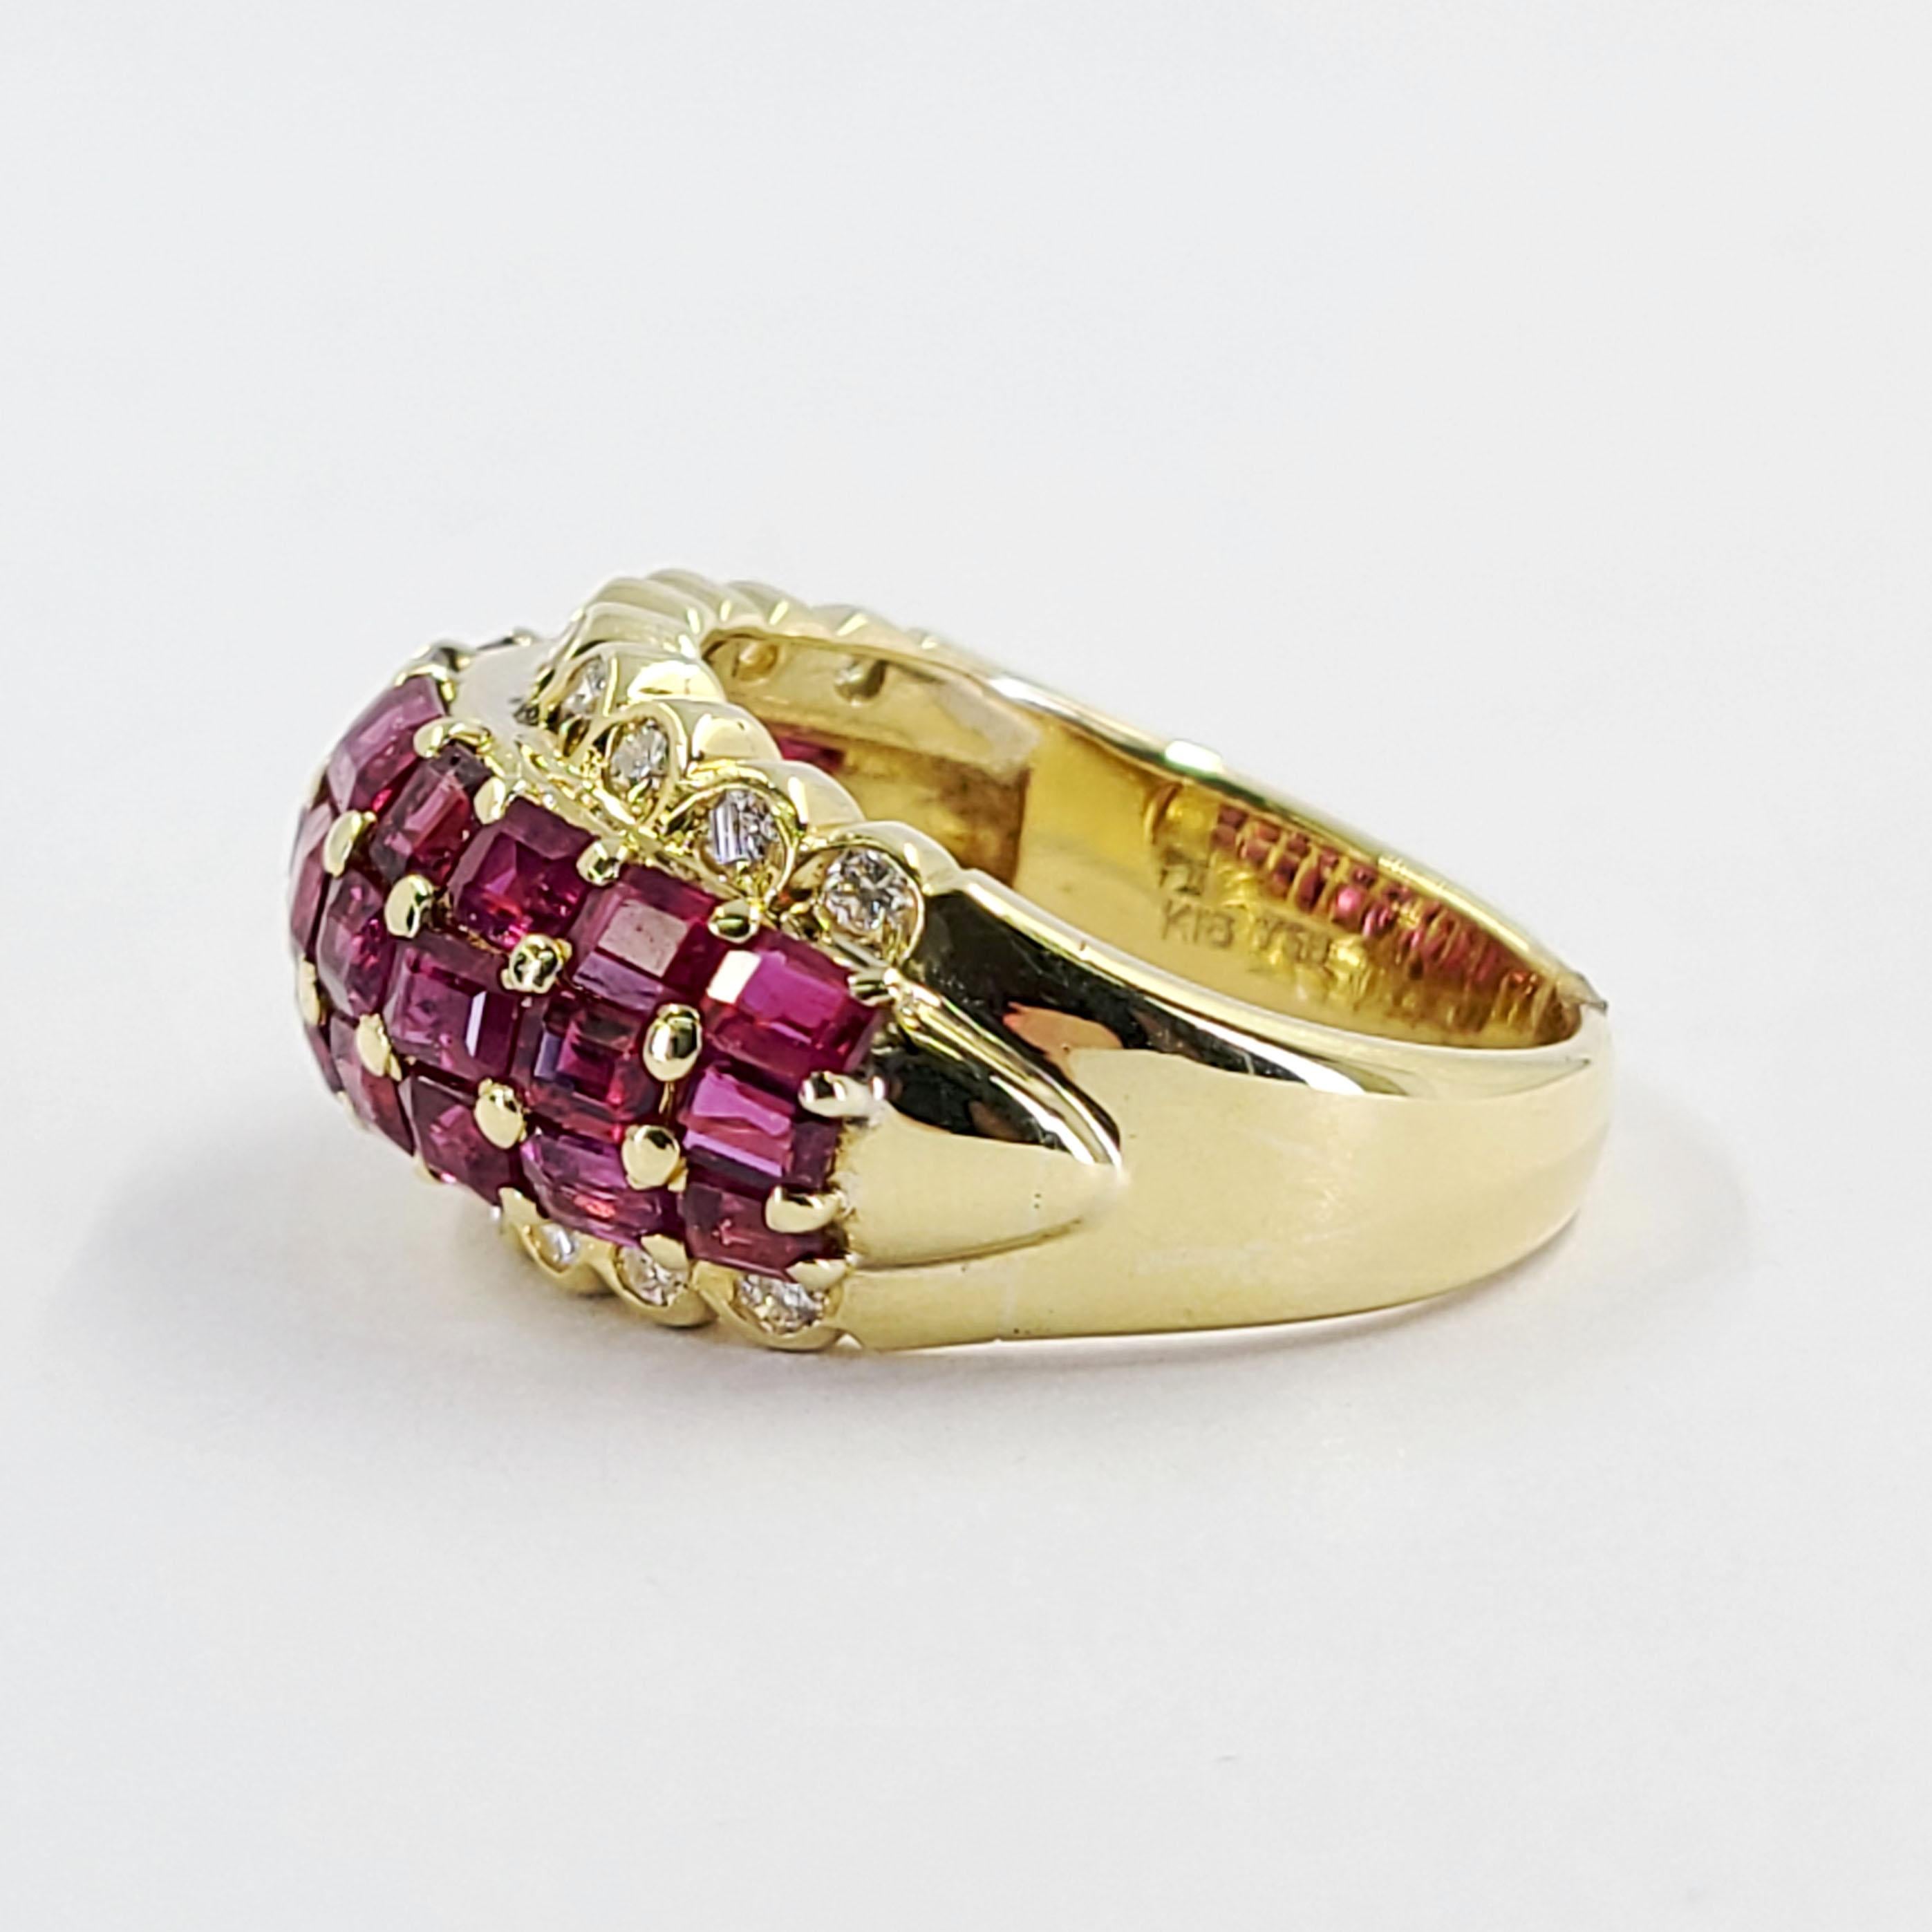 18 Karat Yellow Gold Dome Ring Featuring 6.00 Carat Total Weight Prong-Set Emerald Cut Rubies Accented By 0.36 Carat Total Weight Round Diamonds Of SI Clarity & G/H Color. Finger Size 6.25; Purchase Includes One Sizing Service Prior To Shipment.